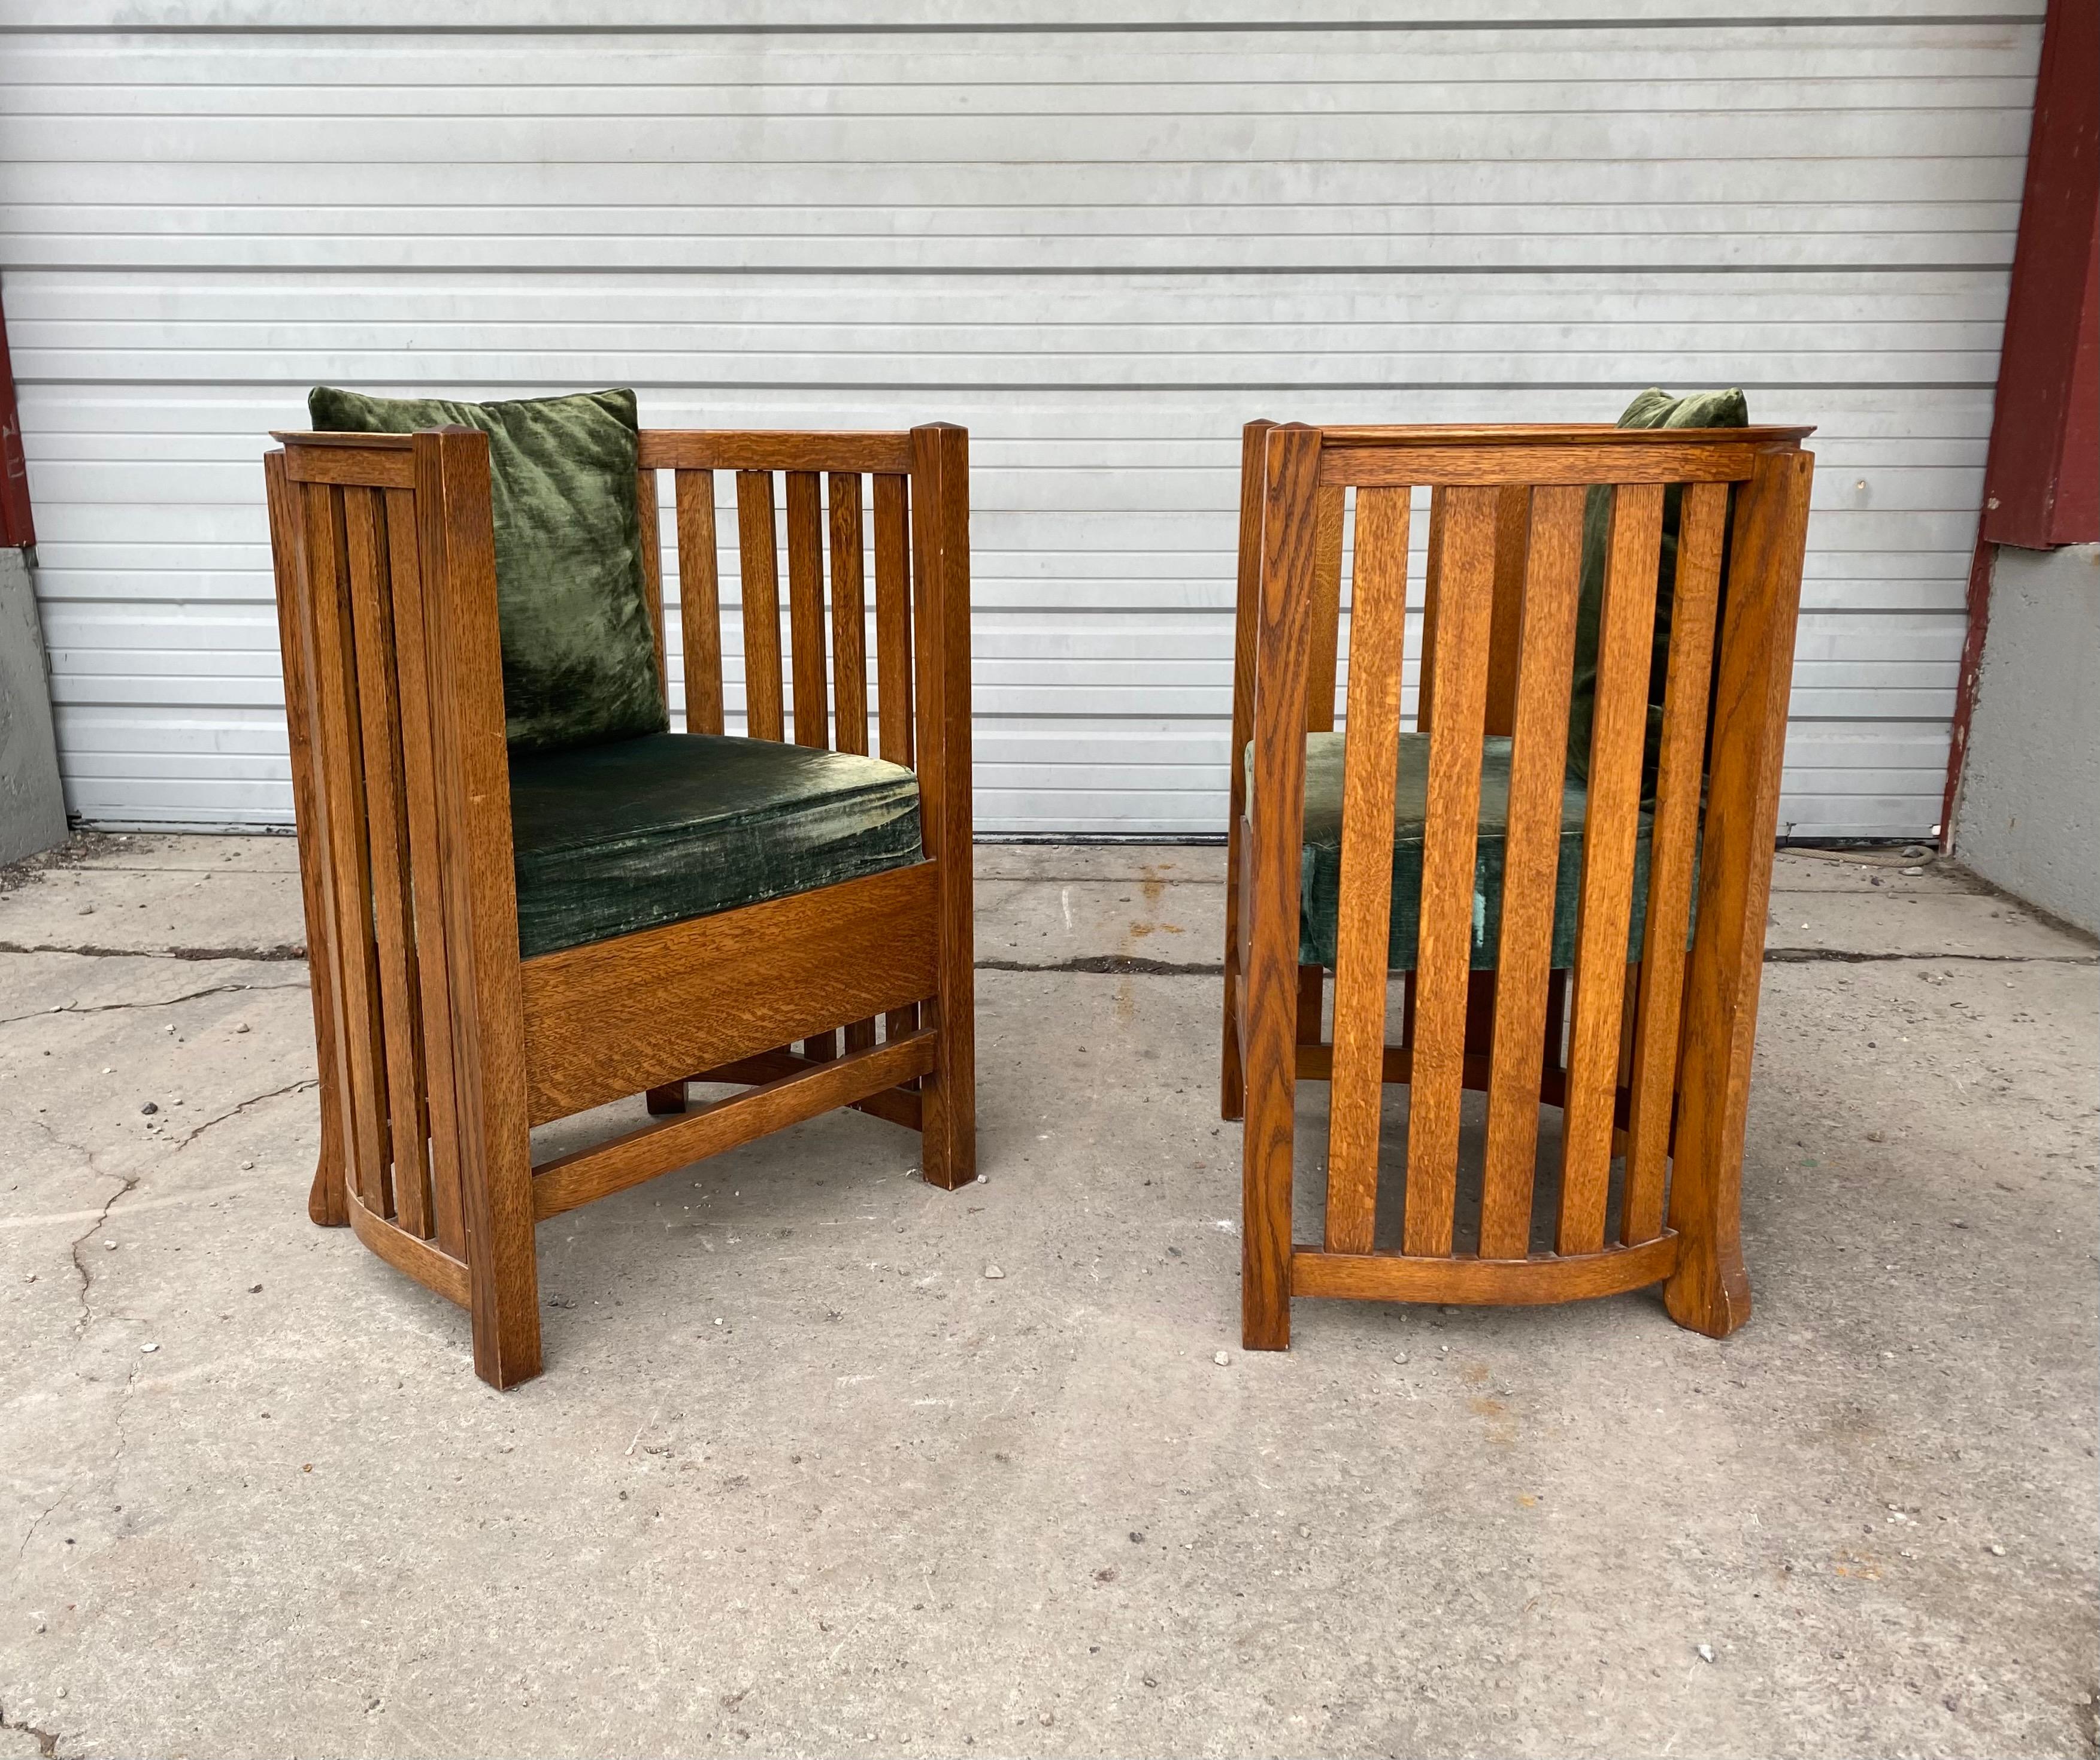 Classic pair of oak barrel chairs, in the manner of Frank Lloyd Wright, attributed to Plail Brothers Chair Company furniture, Classic Arts & Crafts design. Nice quality and construction. Hand delivery avail to New York City or anywhere en route from